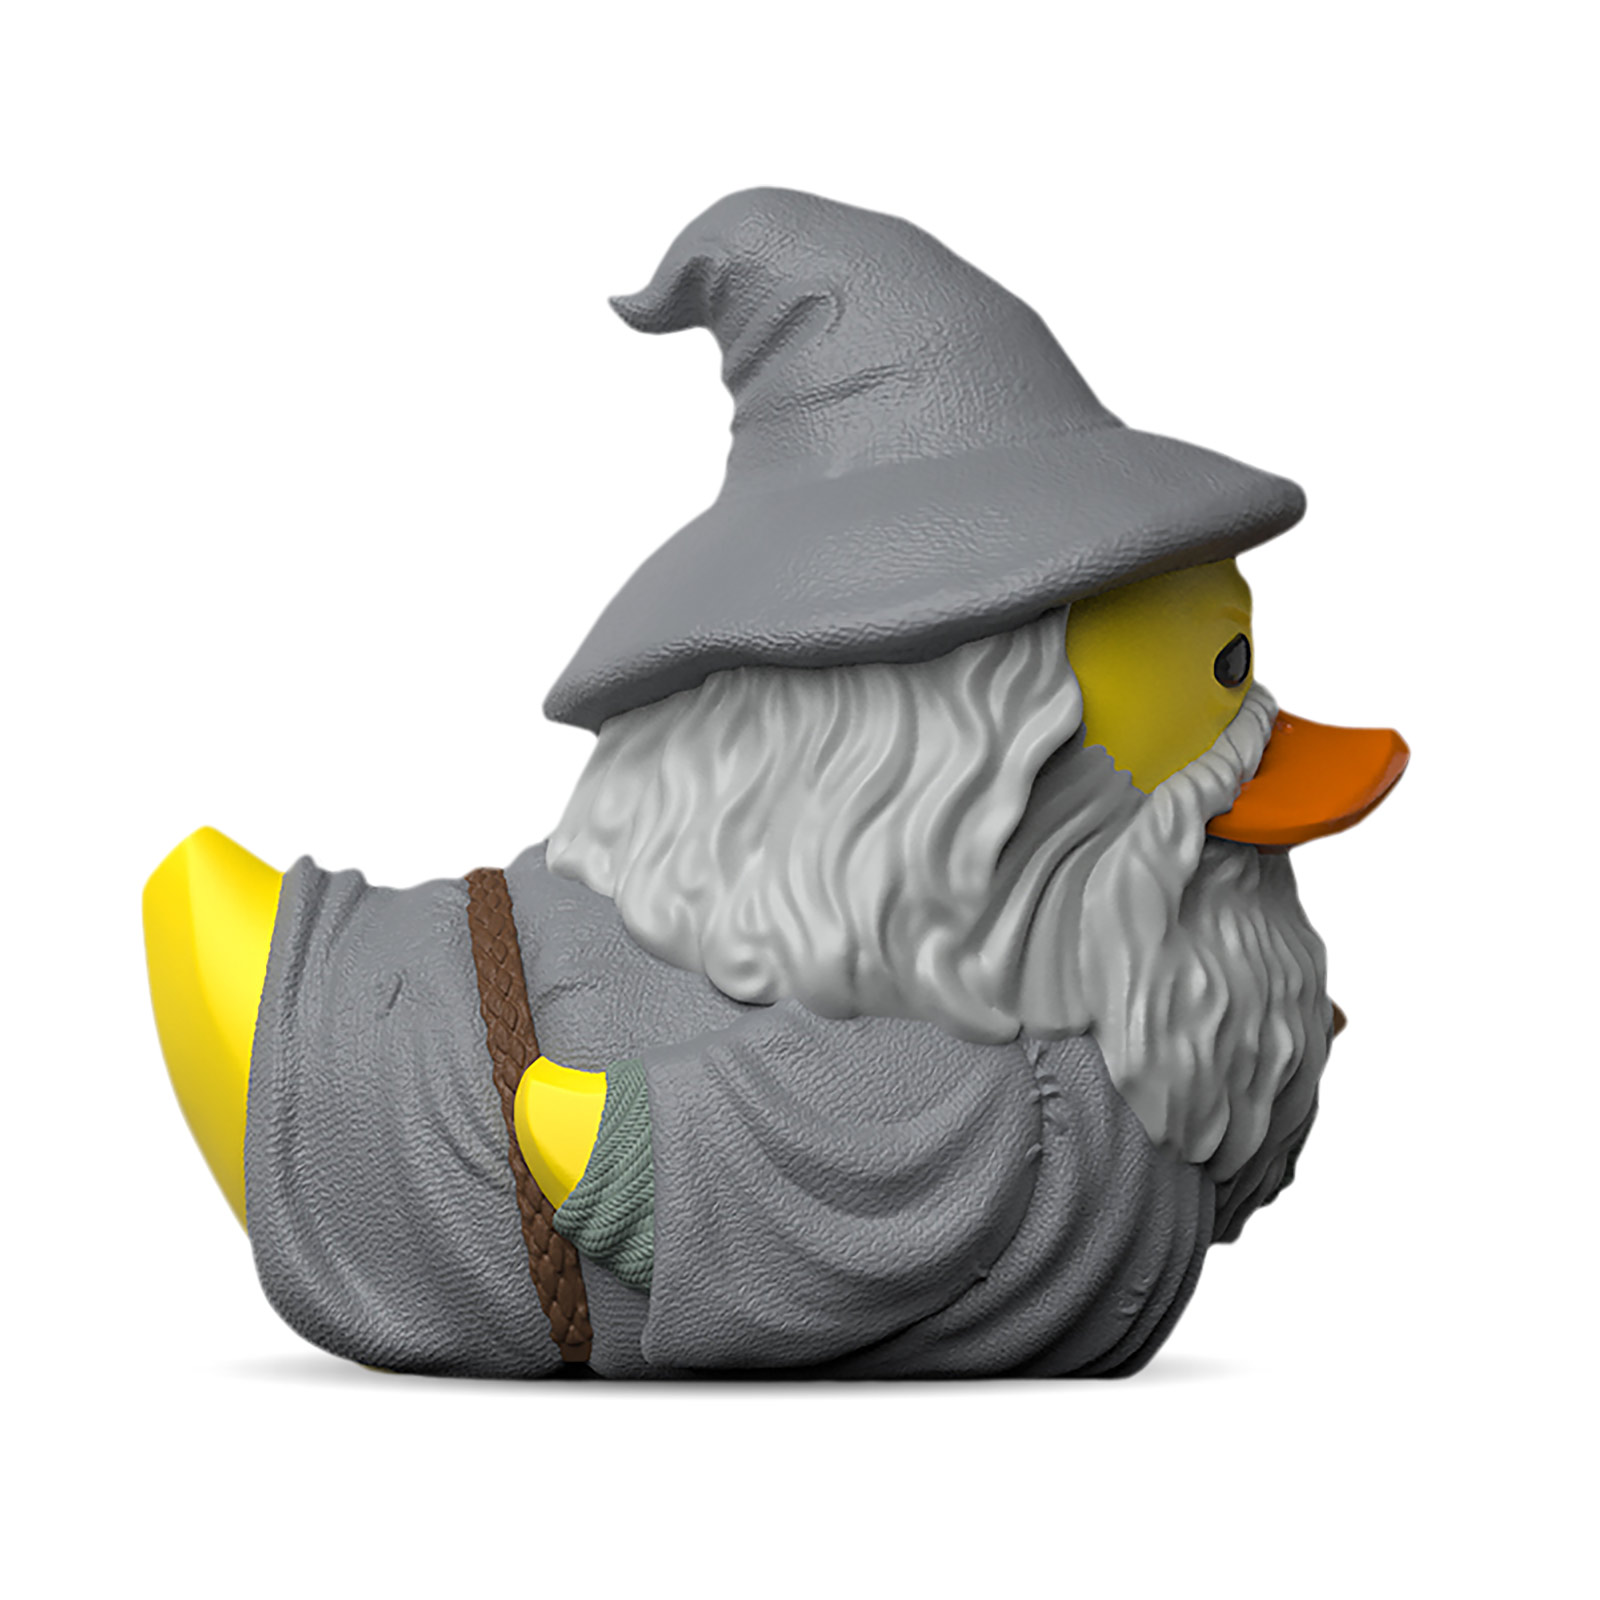 Lord of the Rings - Gandalf the Grey TUBBZ Decorative Duck